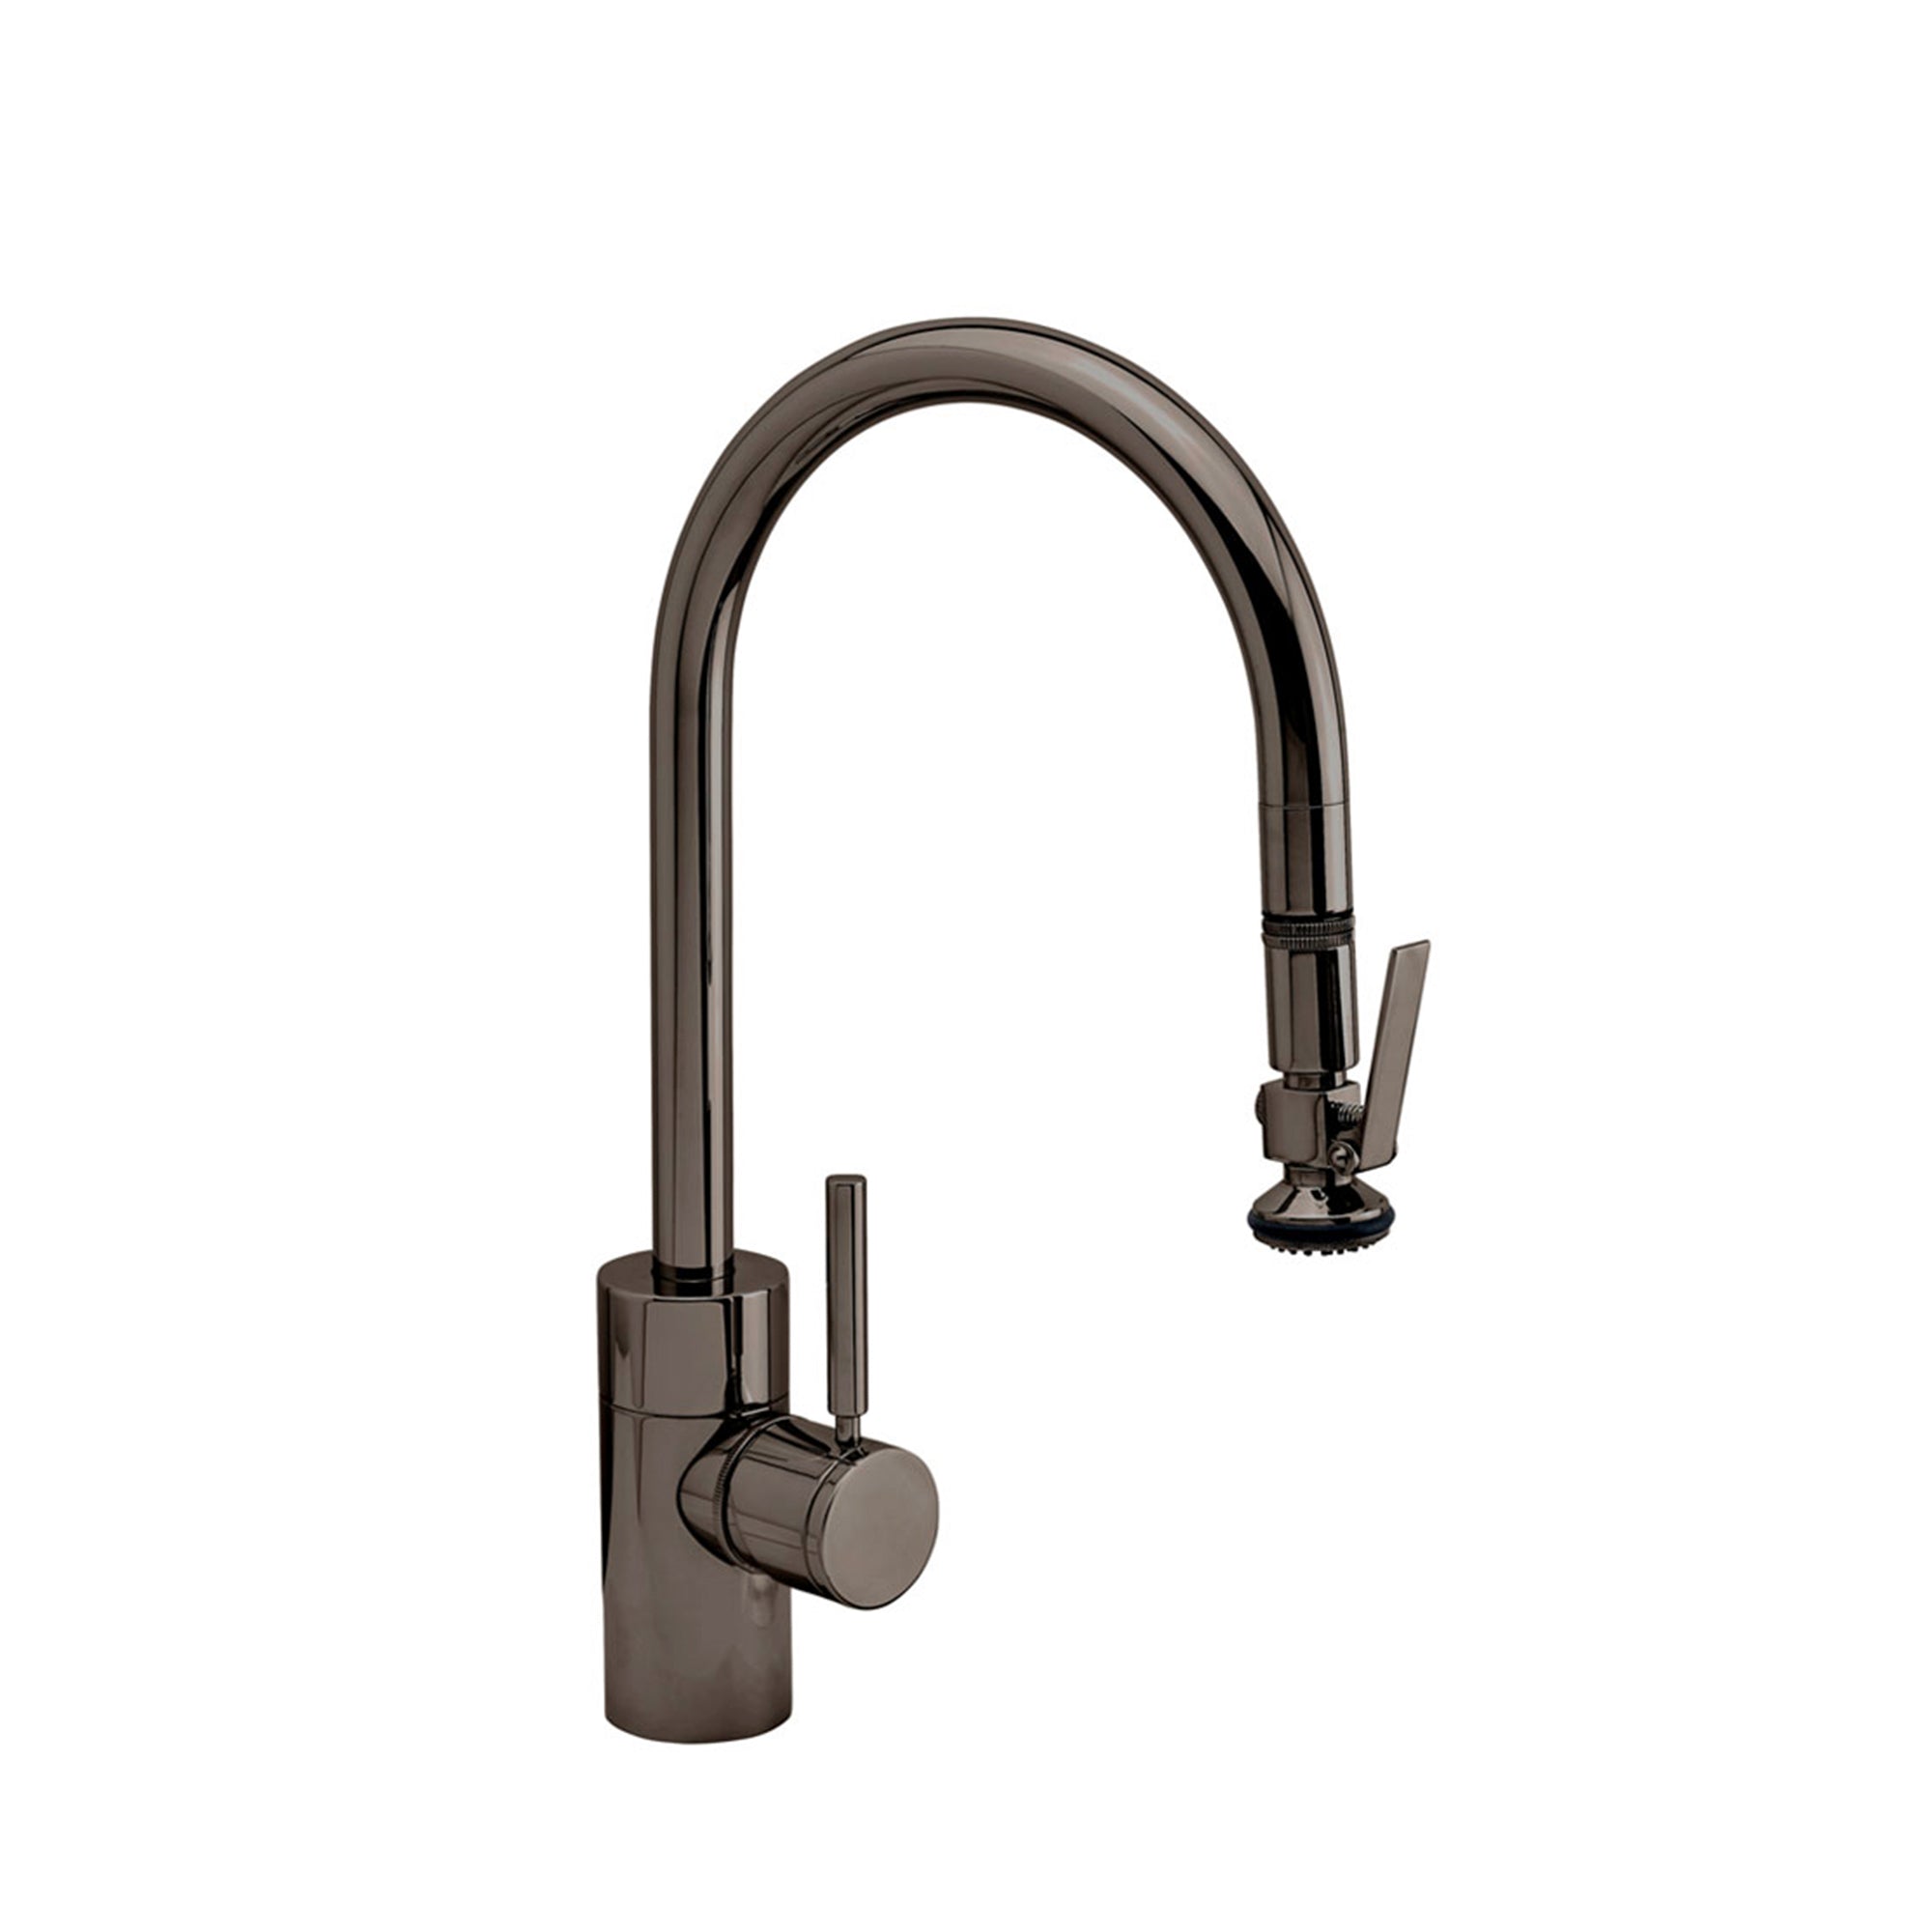 Waterstone Contemporary PLP Pulldown Faucet - 5800